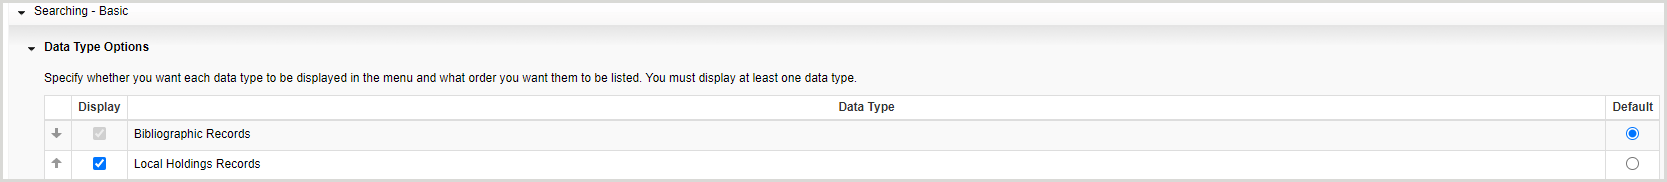 The Acquisitions Data Type Options accordion